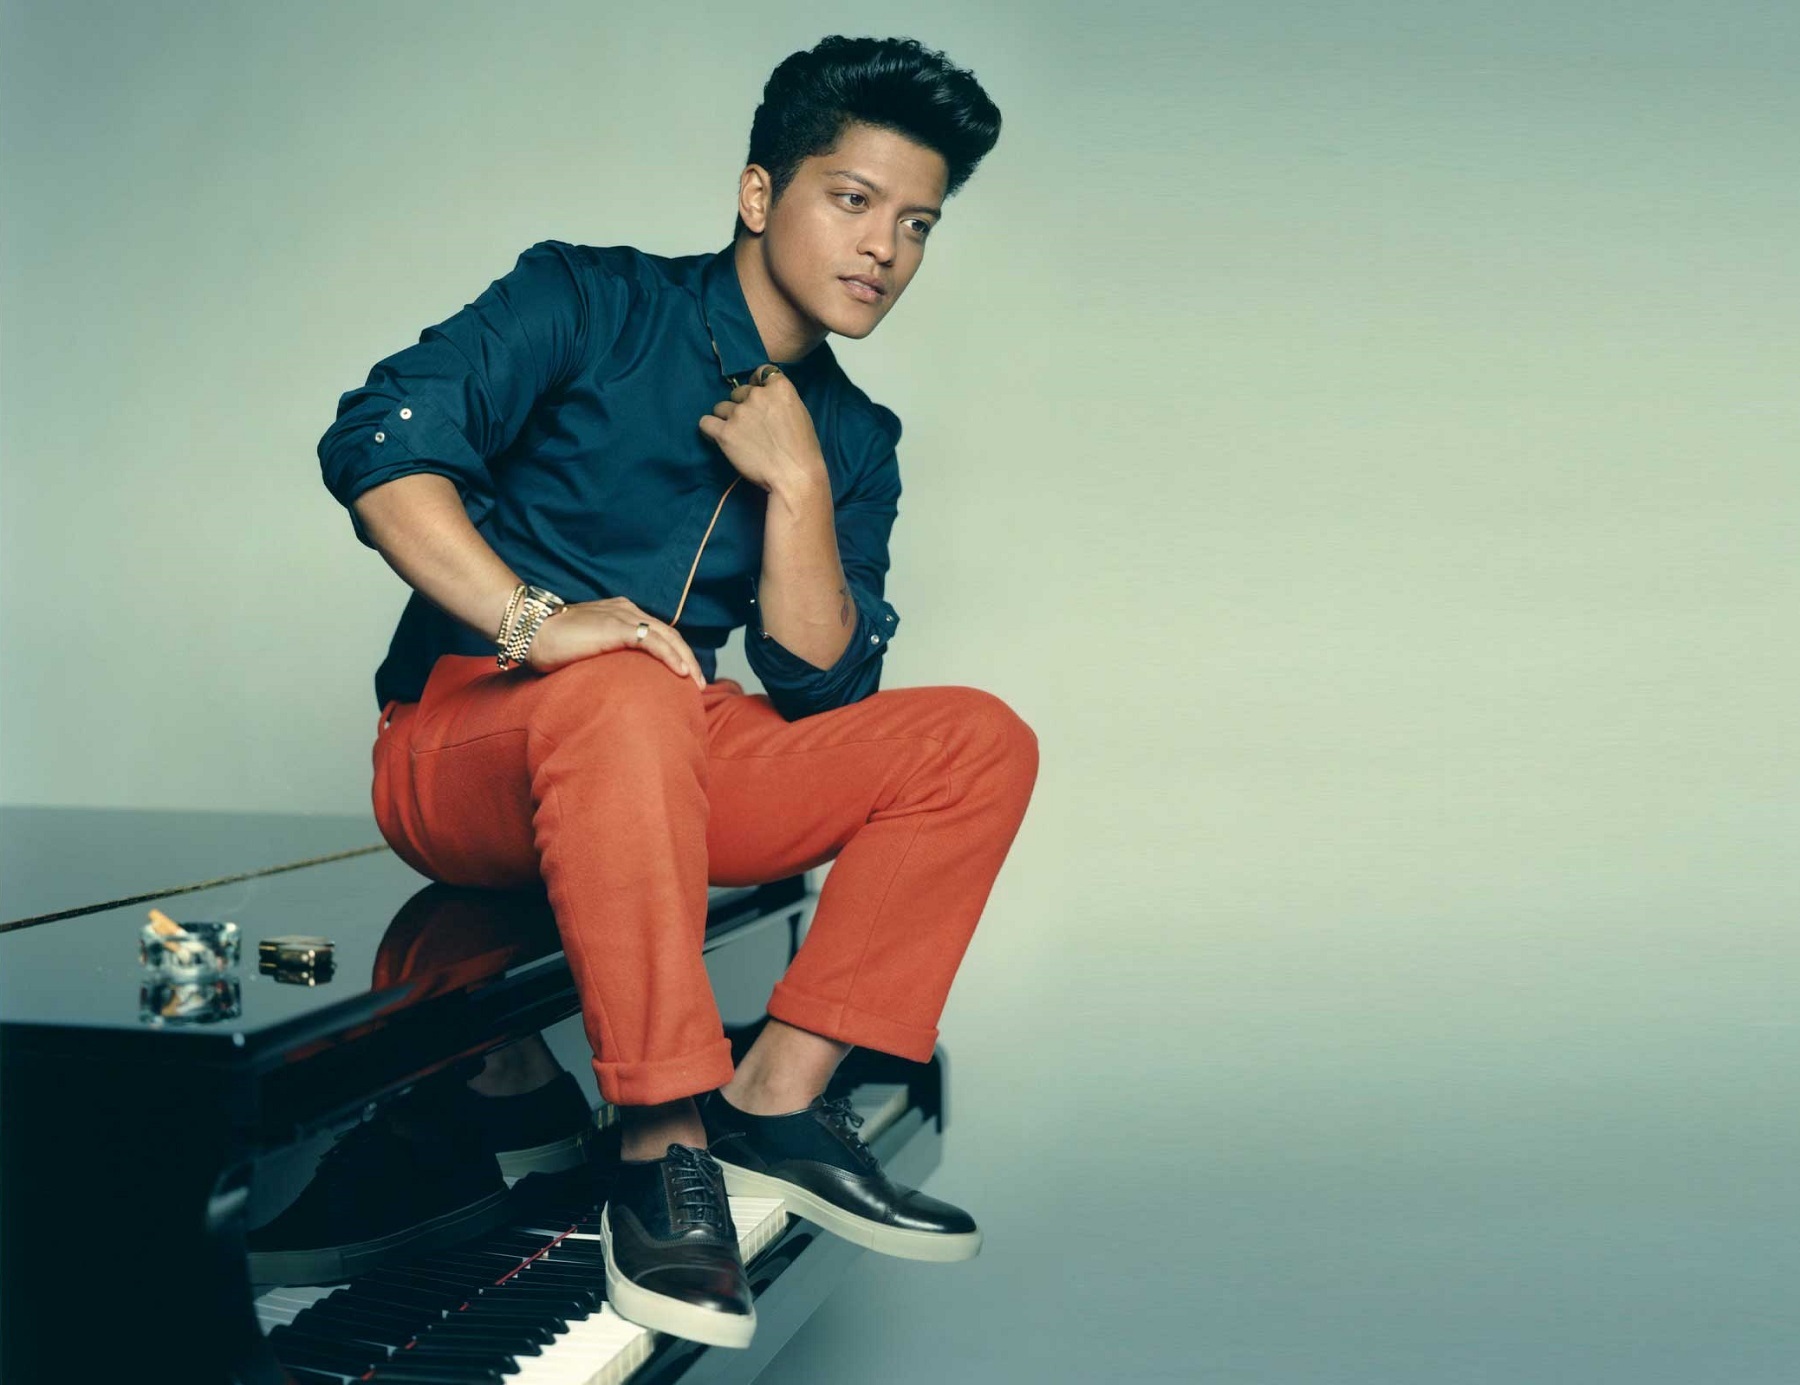 "Phenomenon" Bruno Mars causes fever in the music industry after 4 years of absence - 3